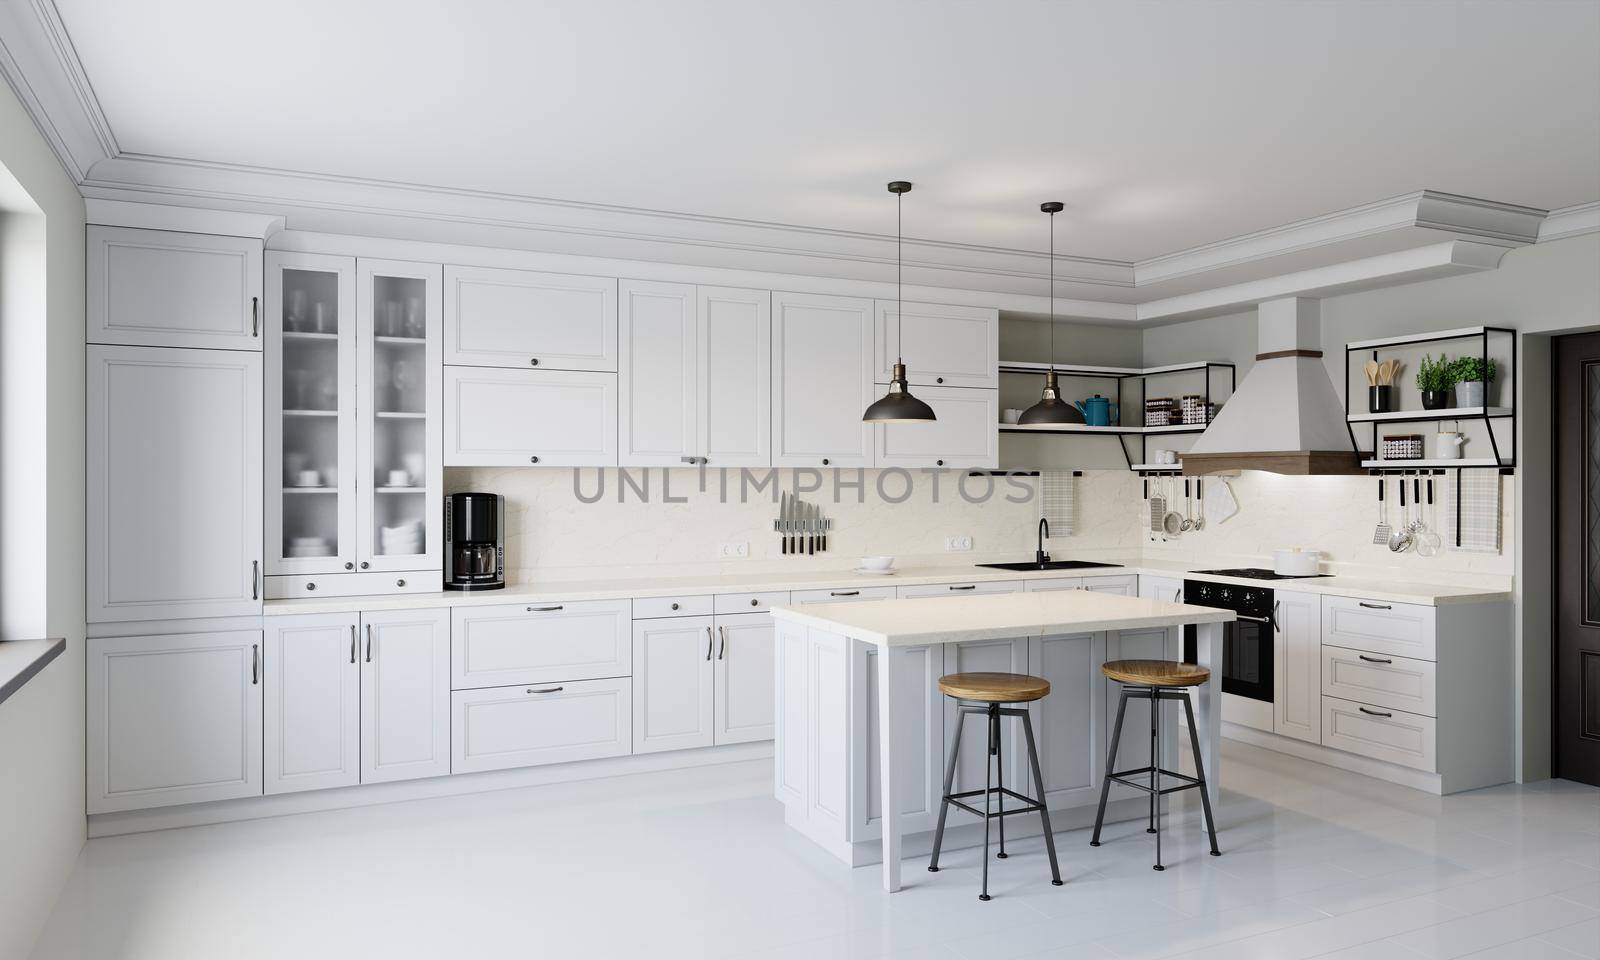 Modern style kitchen with light counter top with sink, hob, oven, kitchen utensils. There are drawers under the table top. 3D rendering.